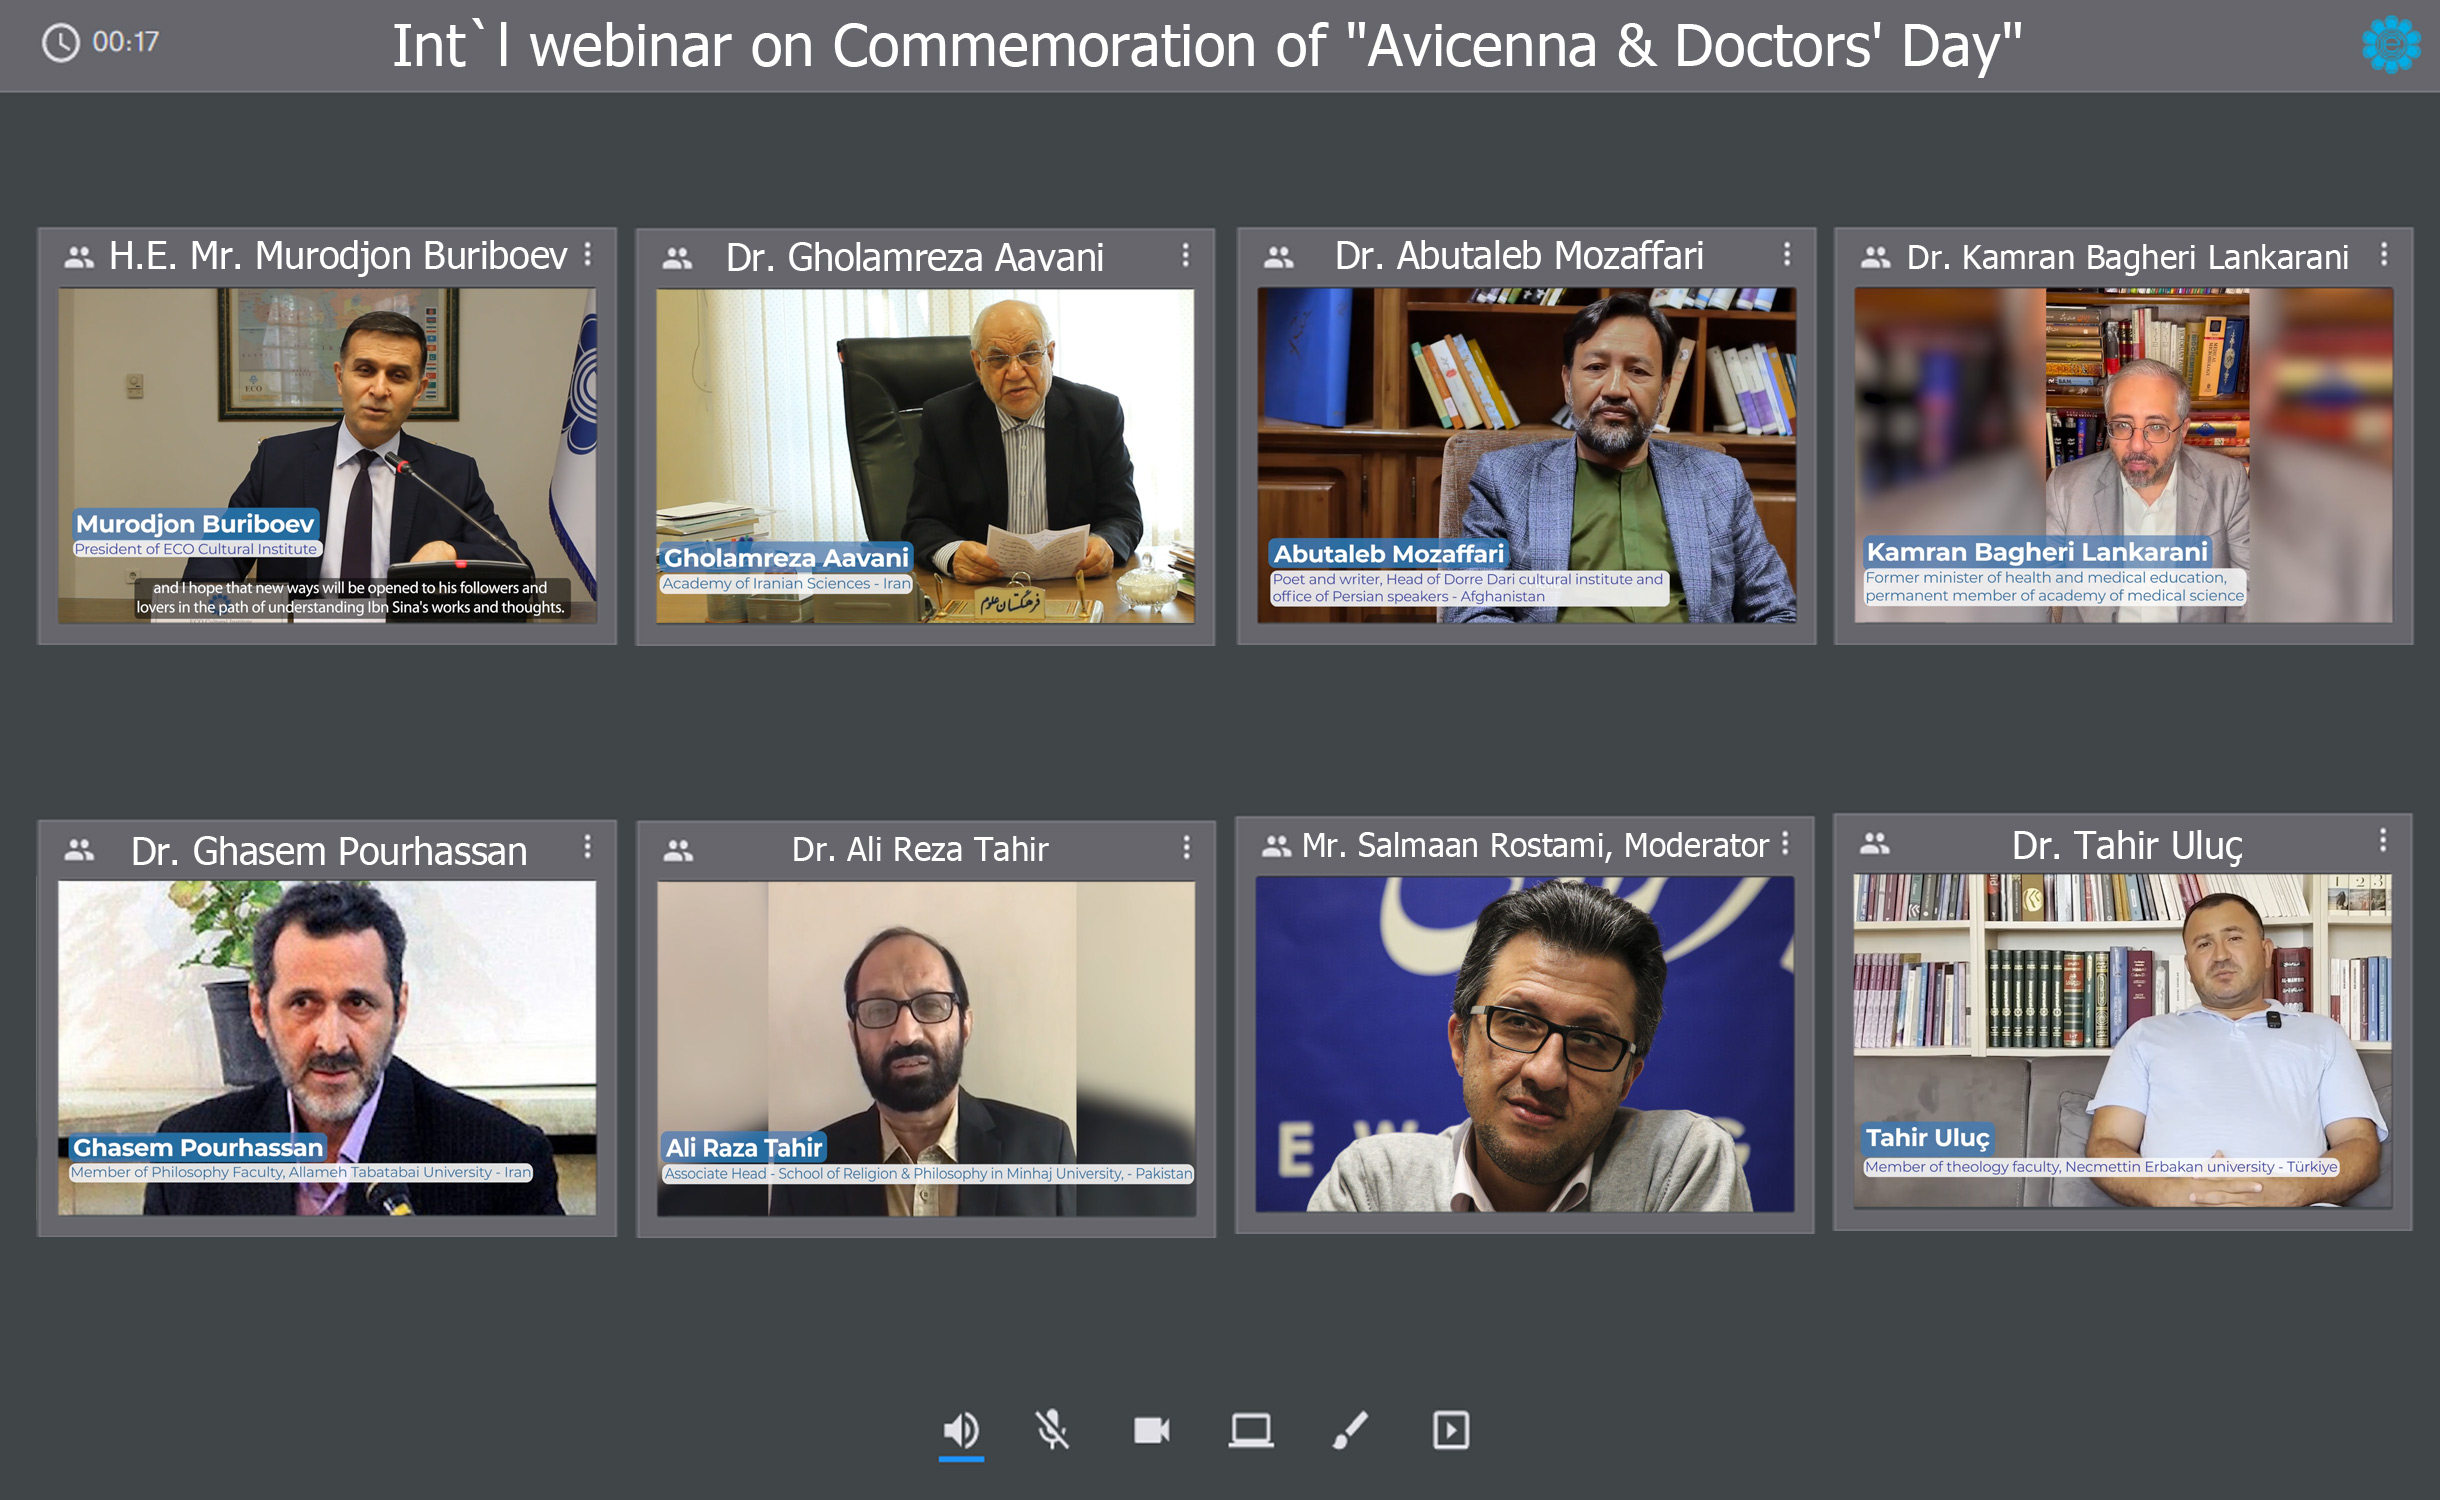 Int`l webinar on Commemoration of "Avicenna & Doctors' Day" was held